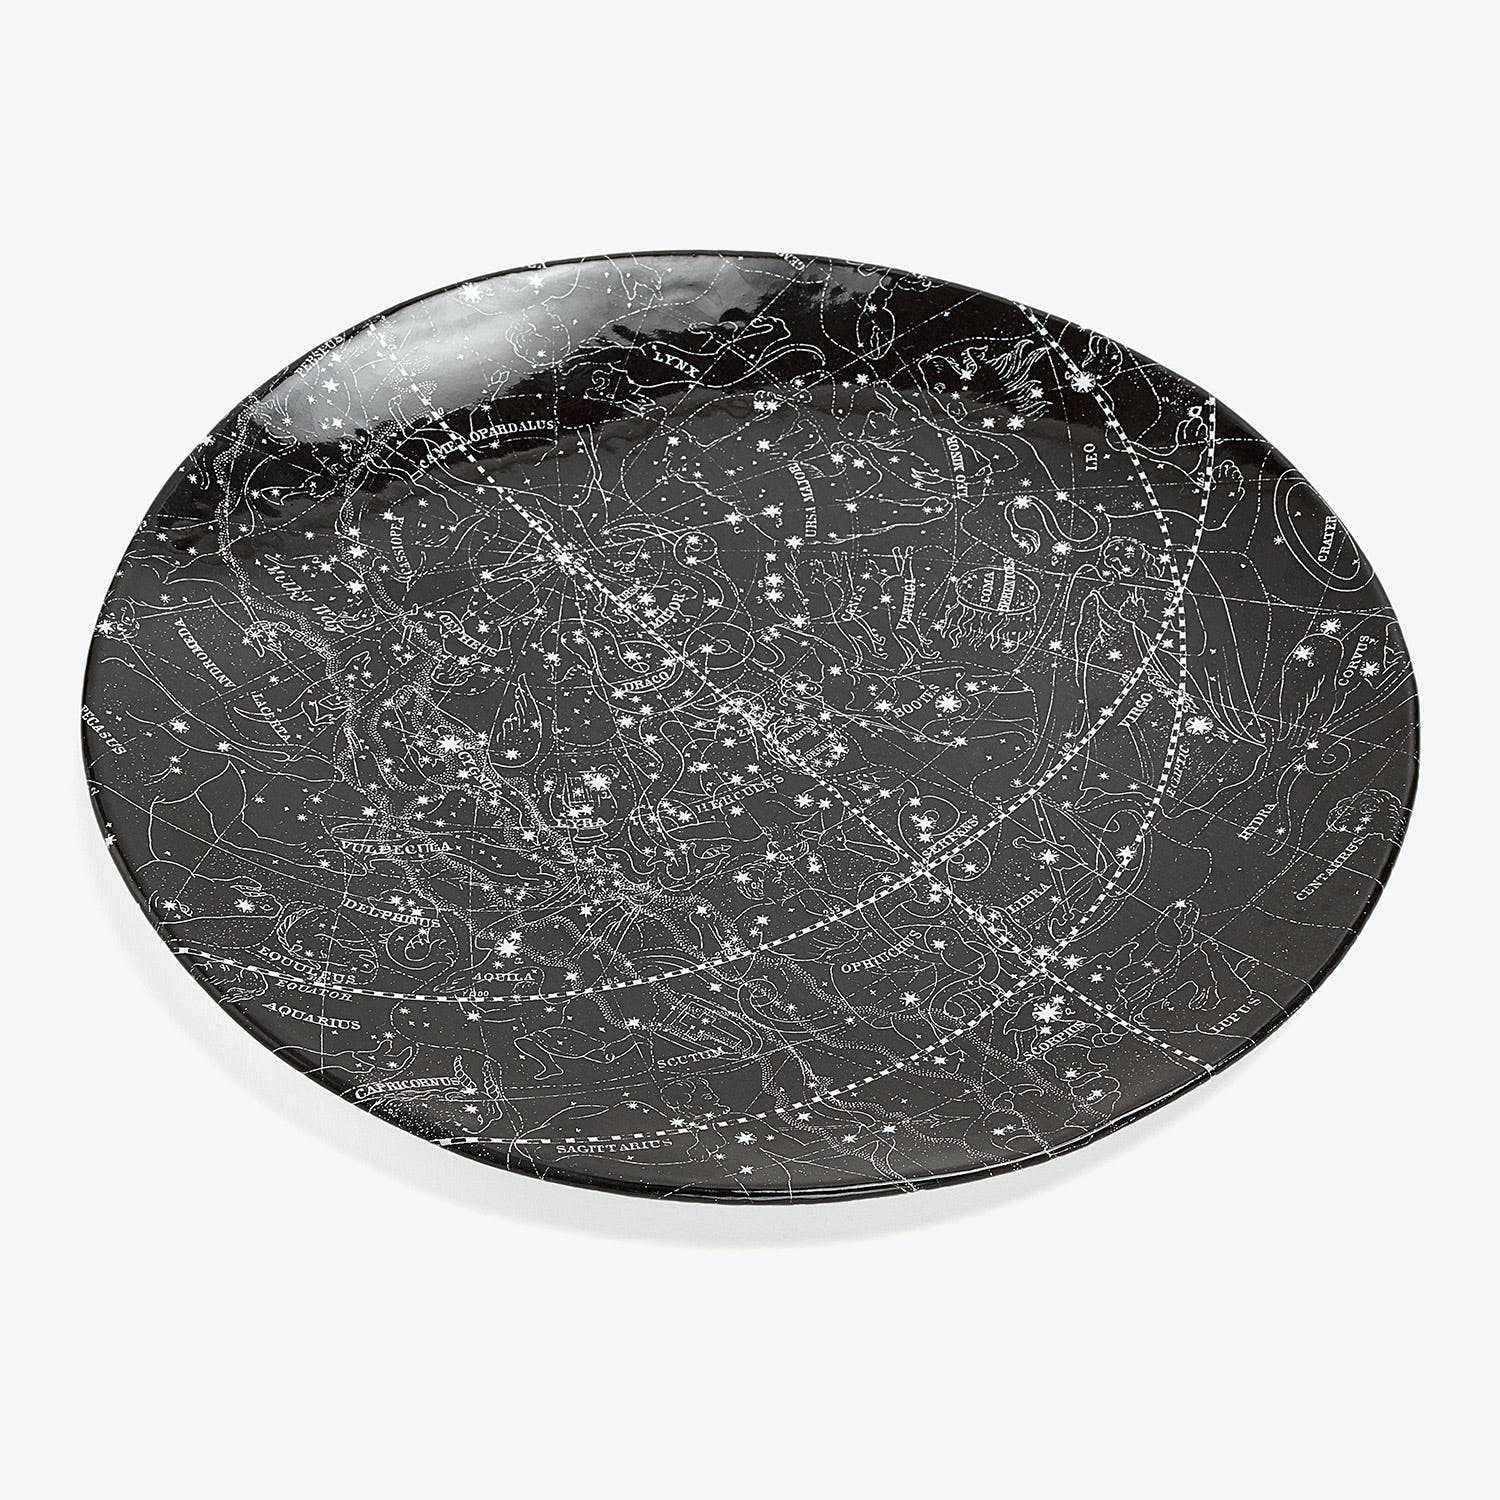 Stunning celestial-themed plate with intricate star chart design.